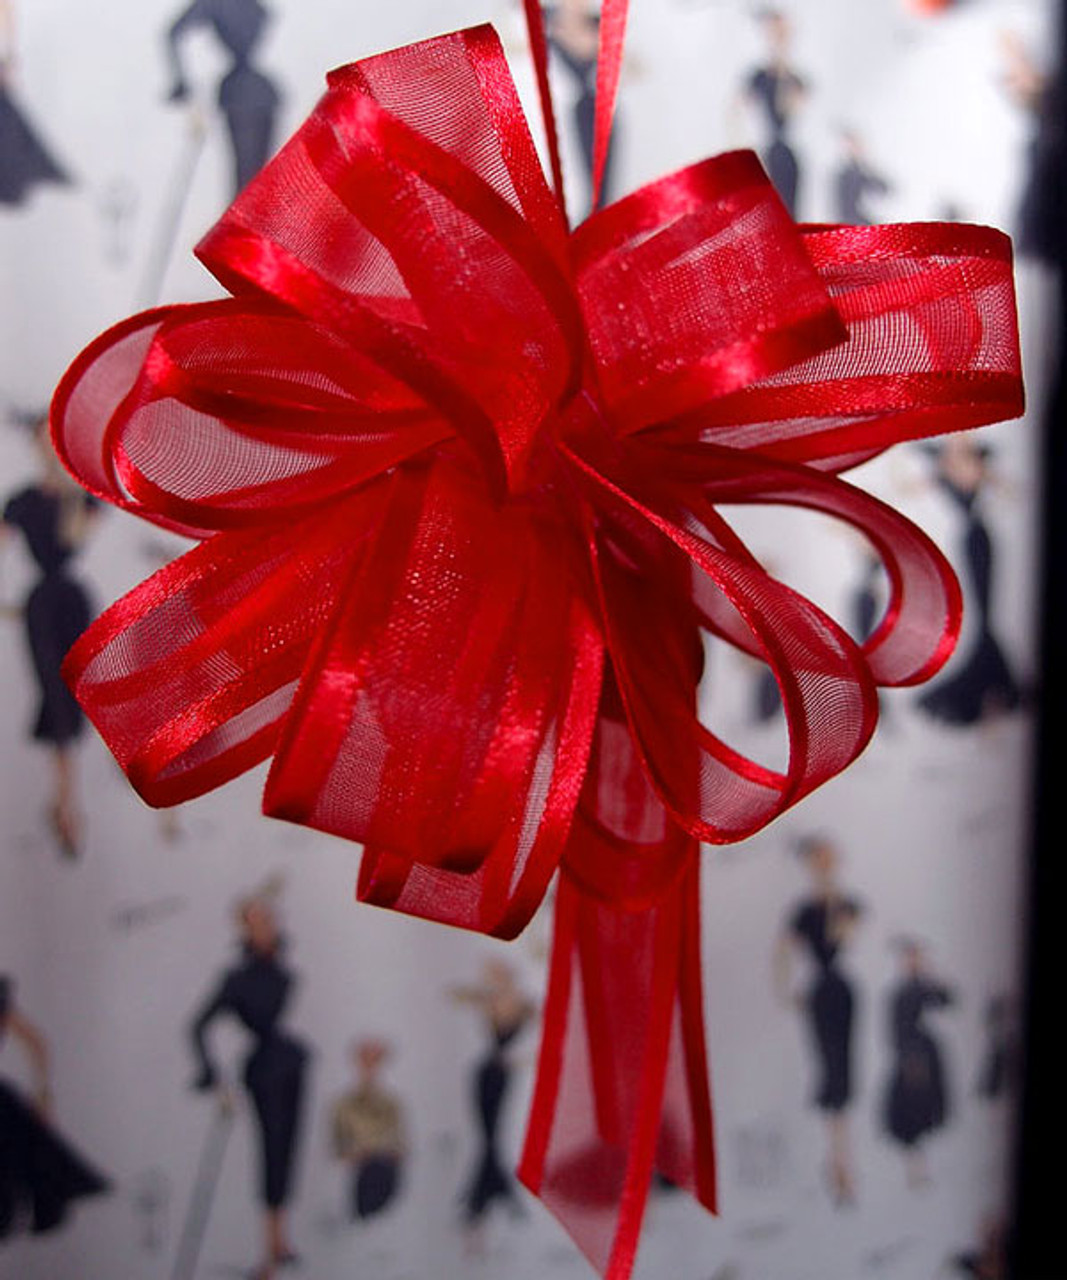 Wholesale Pull Bows, Red Pull Bows, Sheer with Satin Edge Pull Bow | Packaging Decor